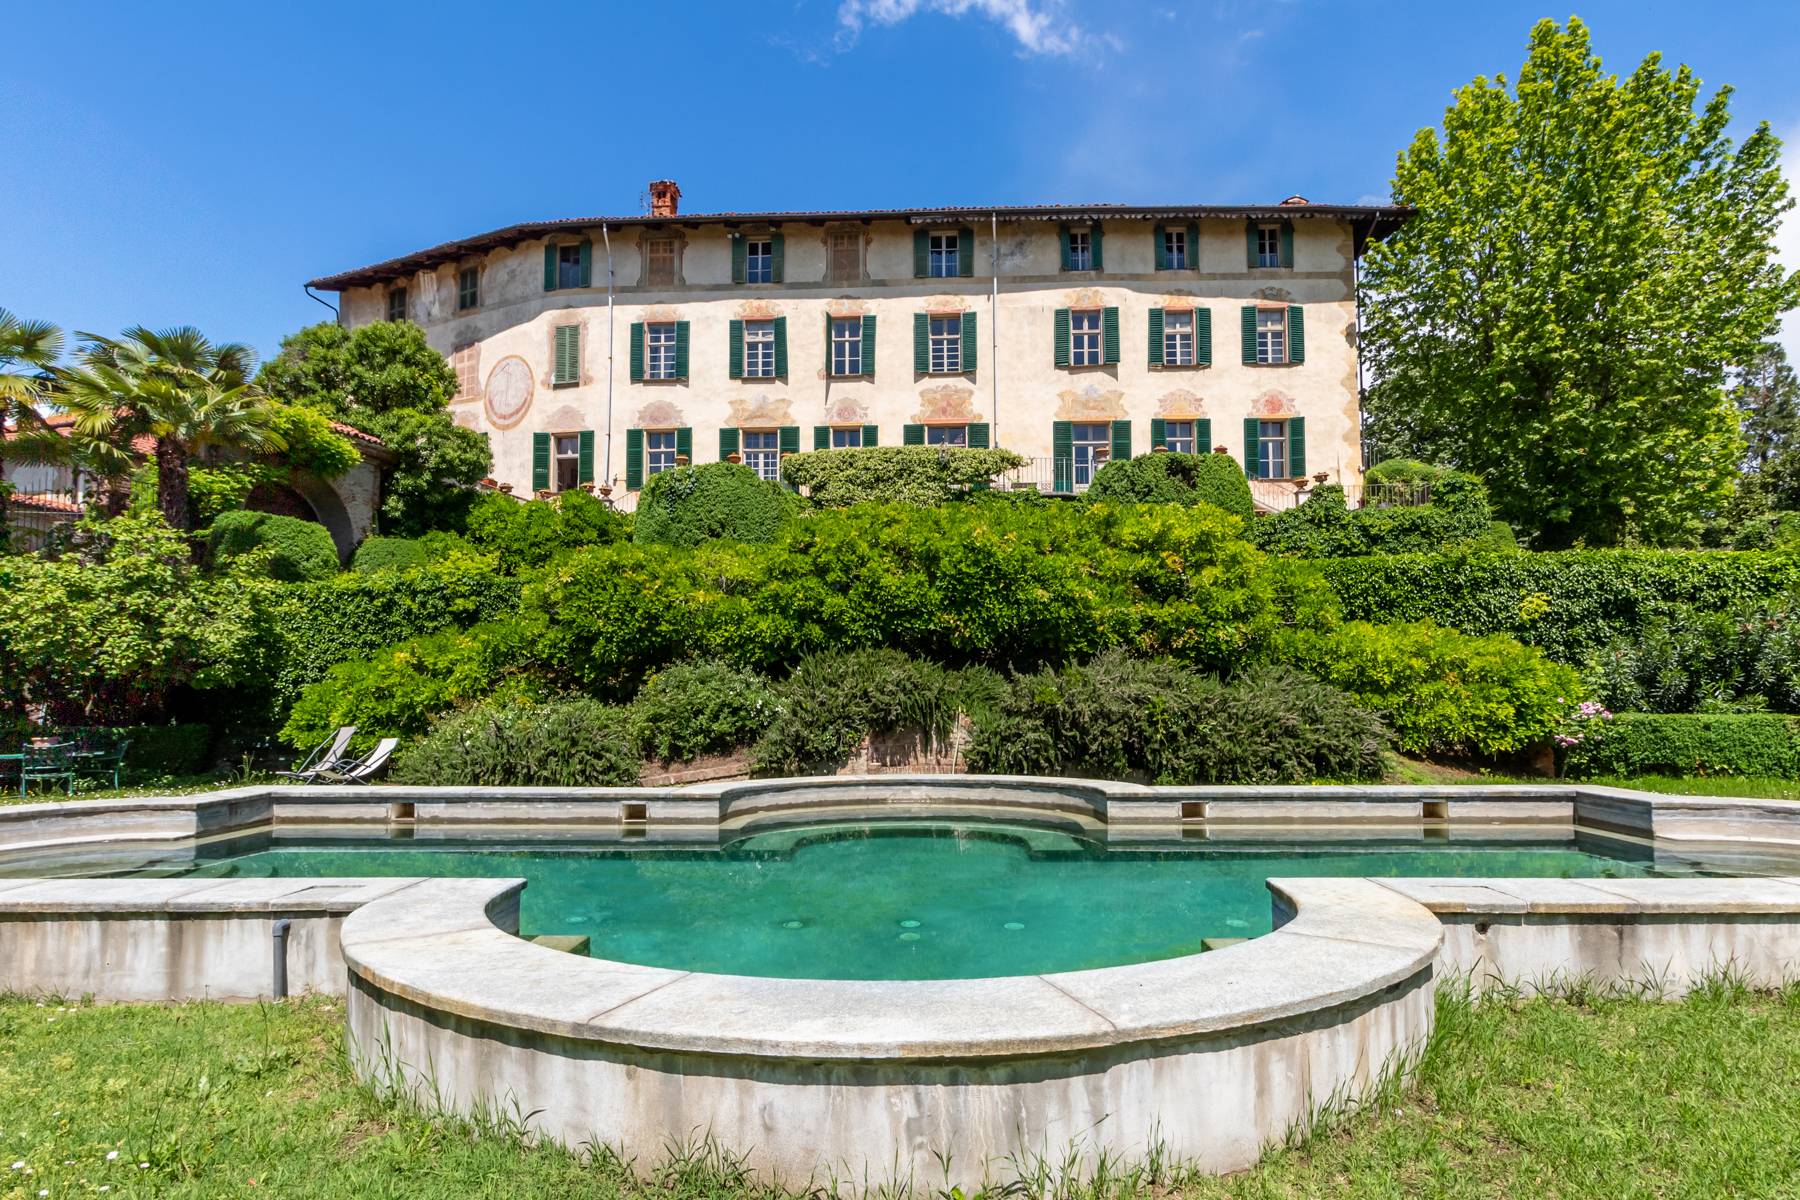 Elegant castle in the heart of Canavese